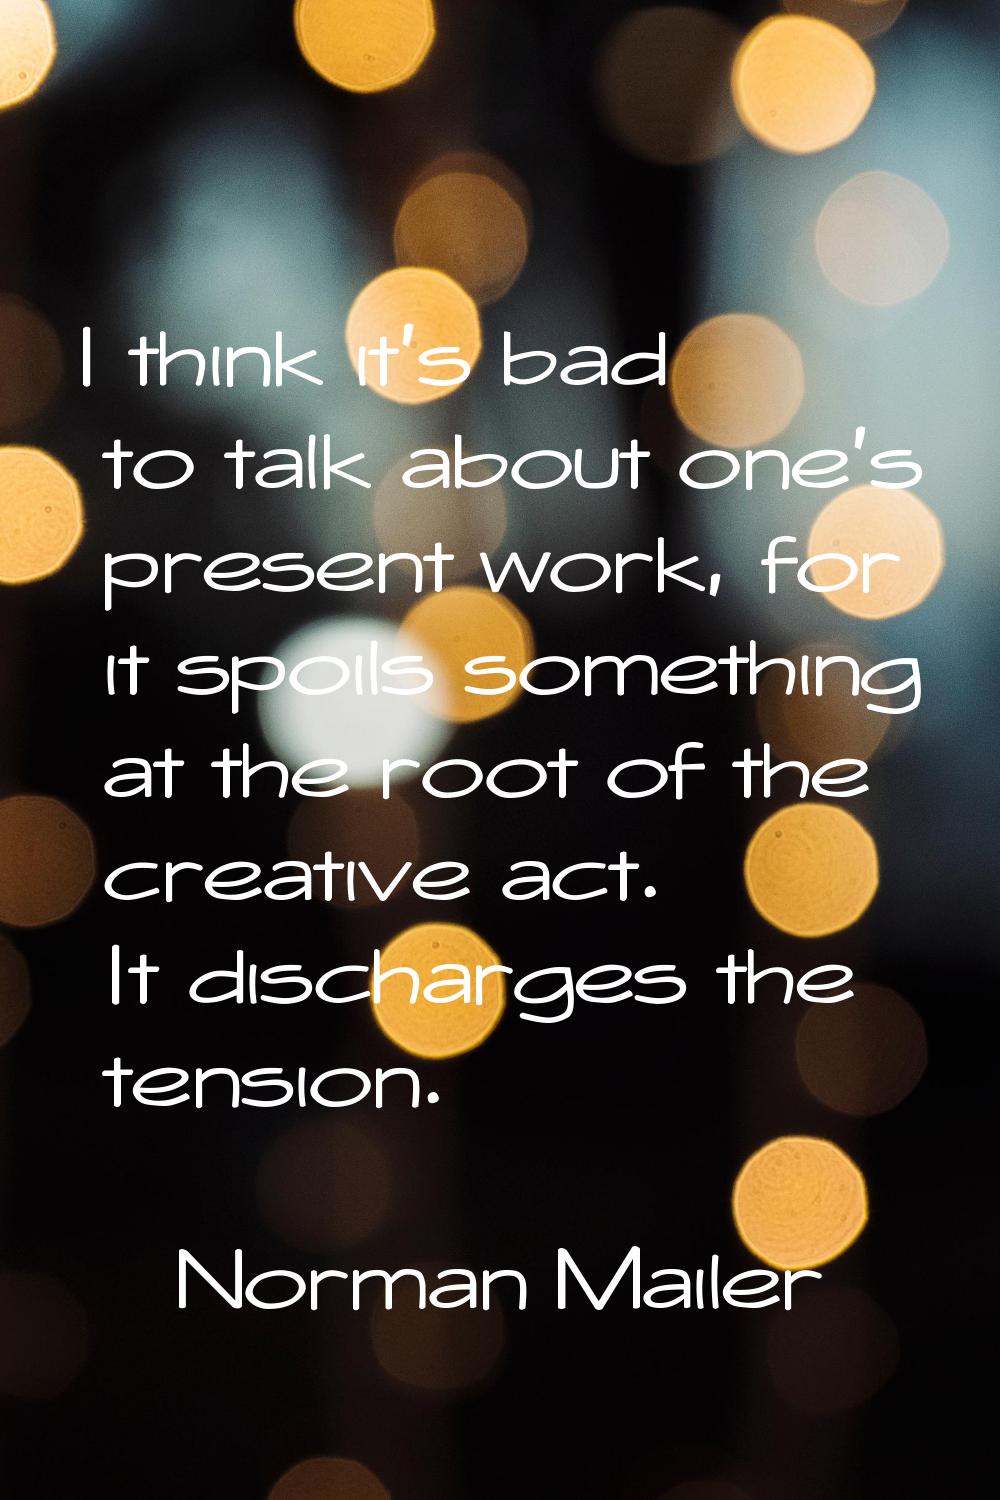 I think it's bad to talk about one's present work, for it spoils something at the root of the creat